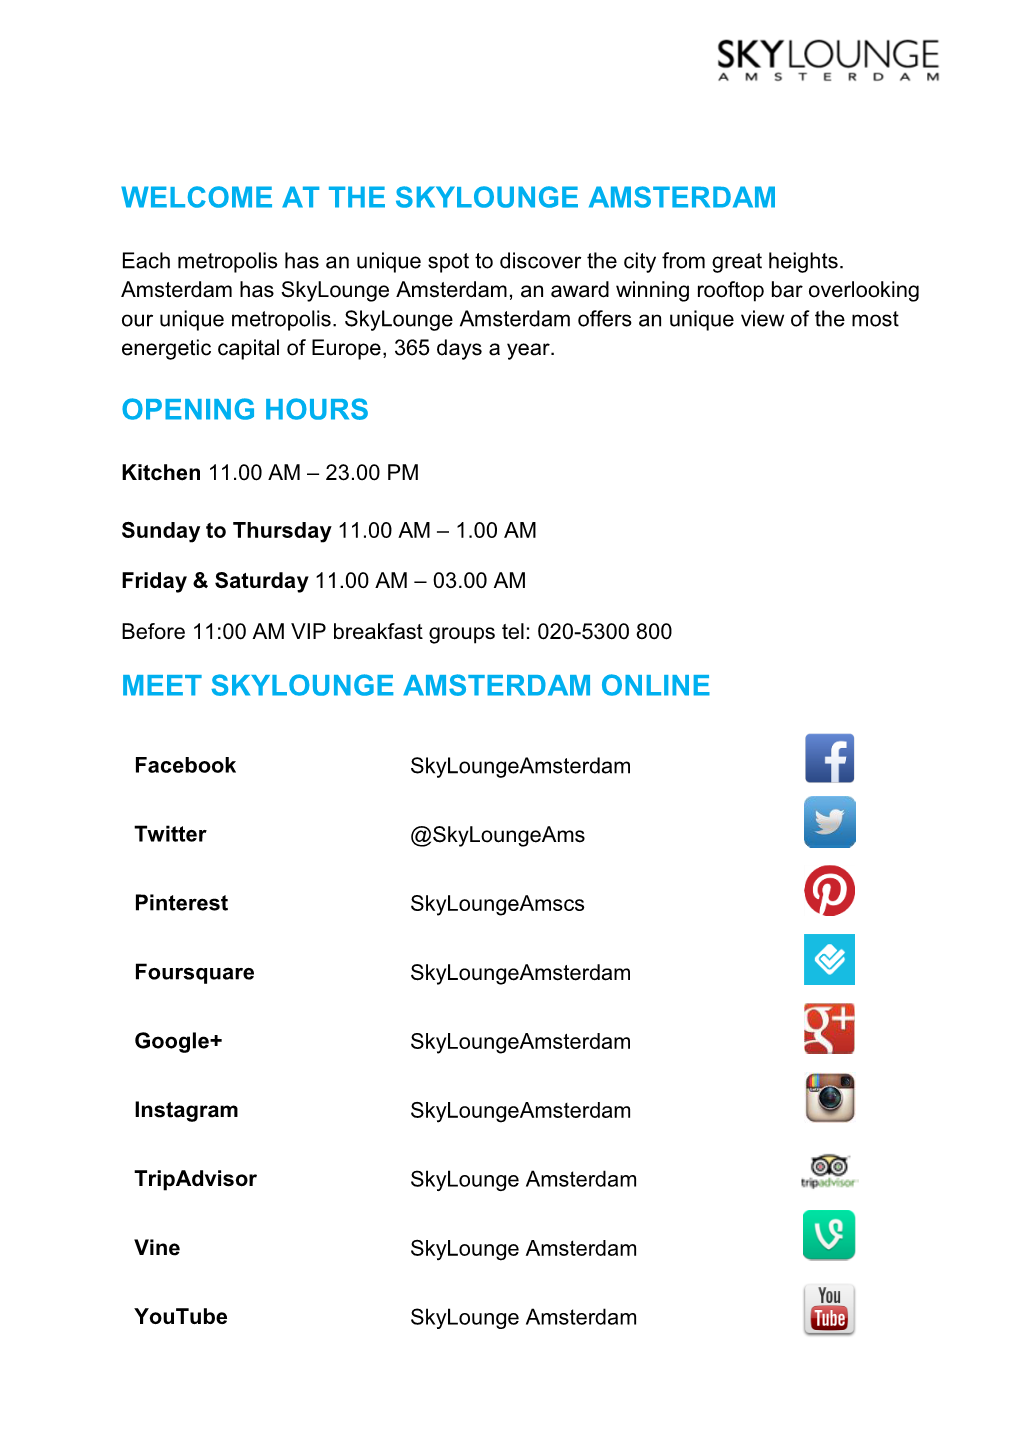 Welcome at the Skylounge Amsterdam Opening Hours Meet Skylounge Amsterdam Online